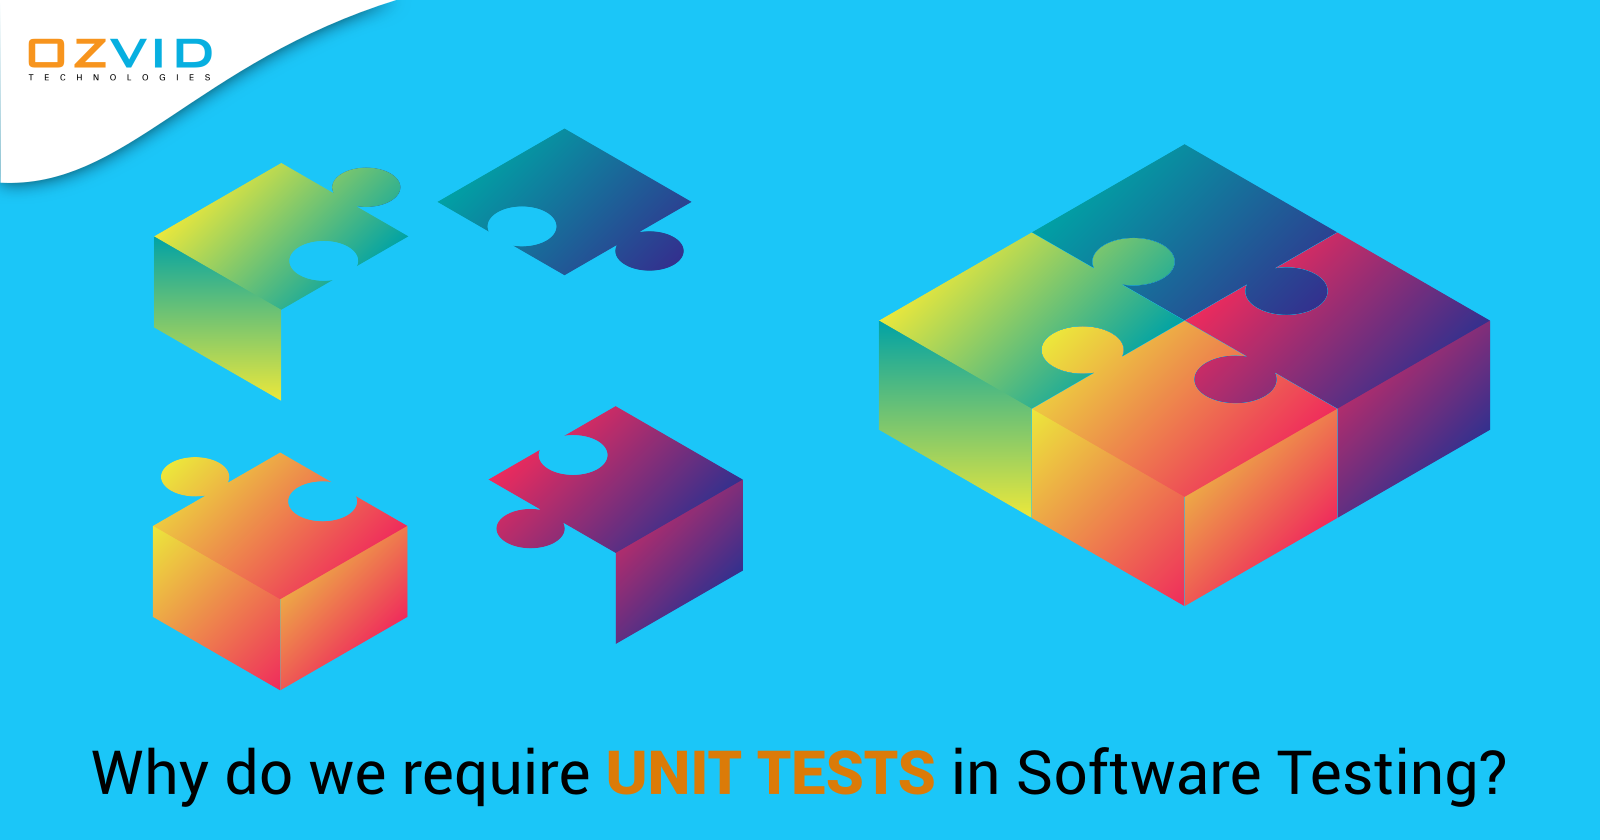 Significance of Writing UNIT TESTS in Software Testing